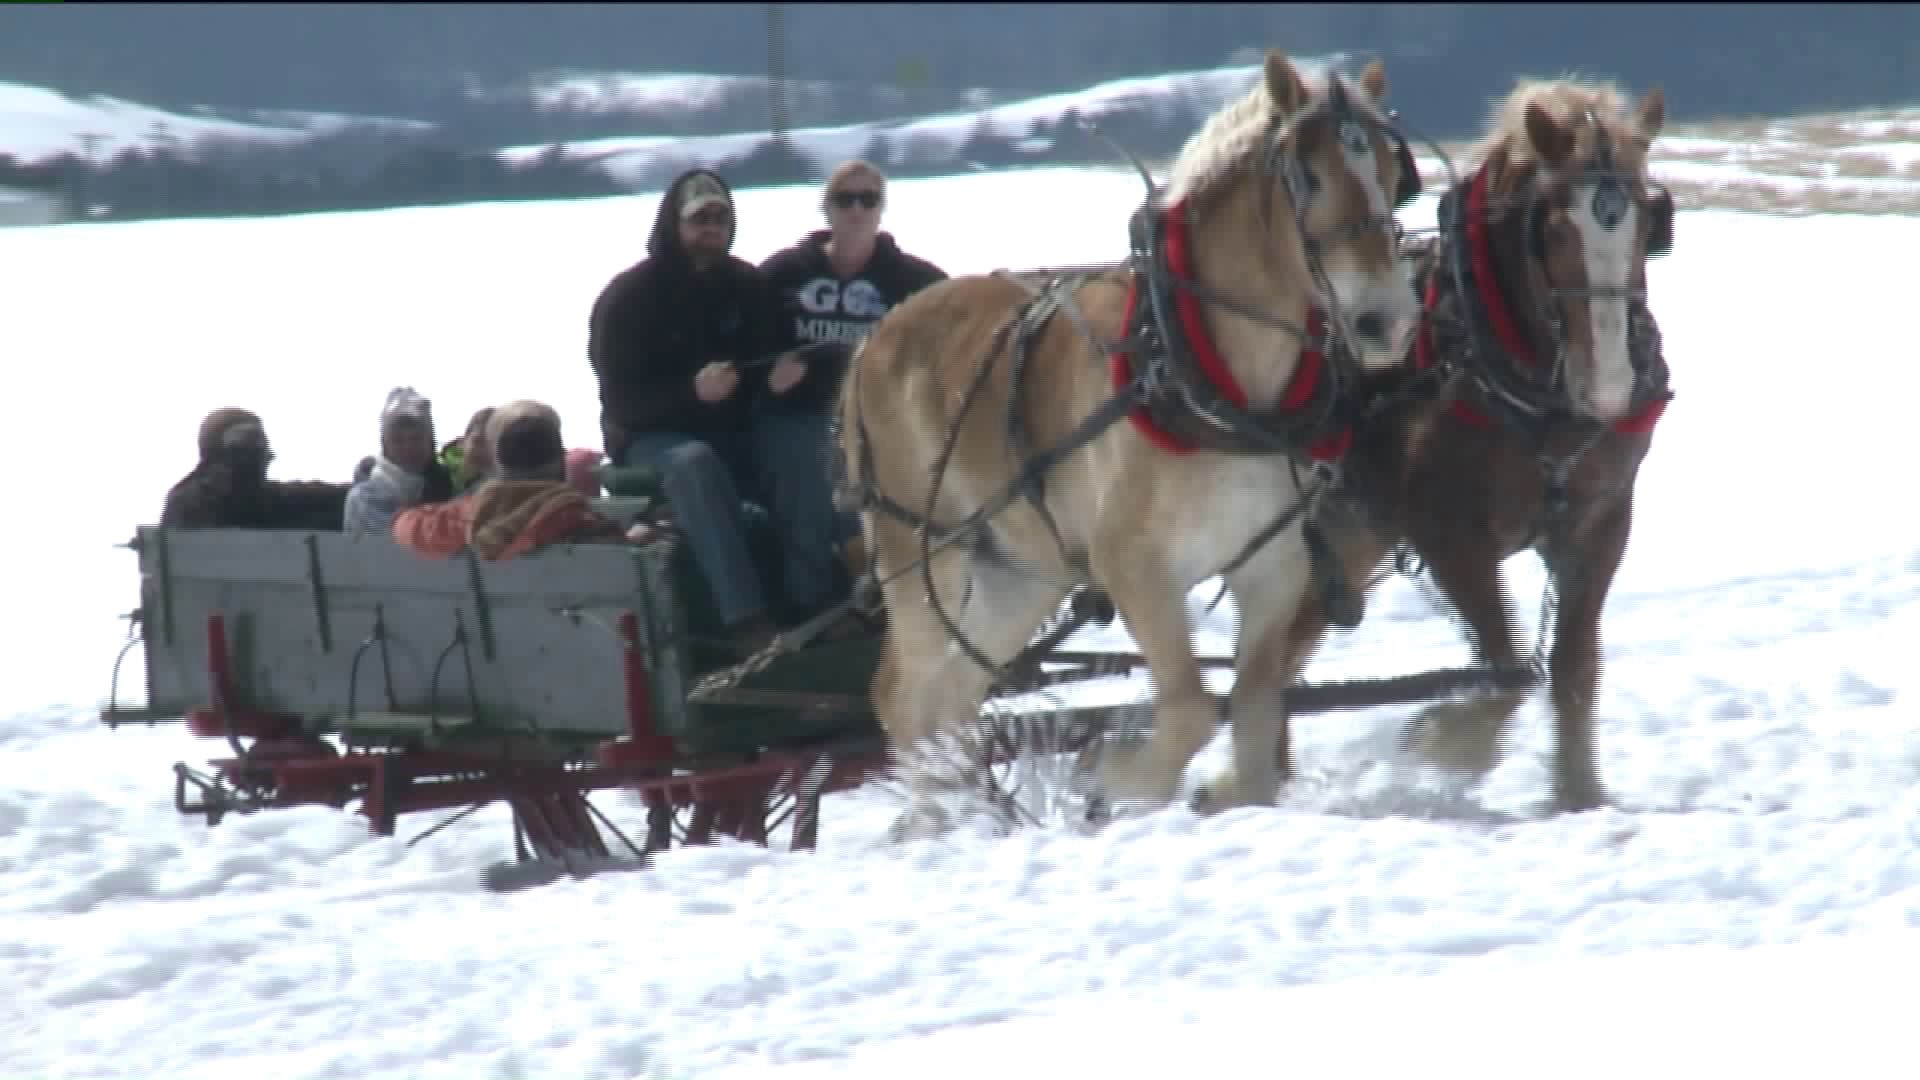 Saying Goodbye to Winter with Old-Fashioned Sleigh Rides